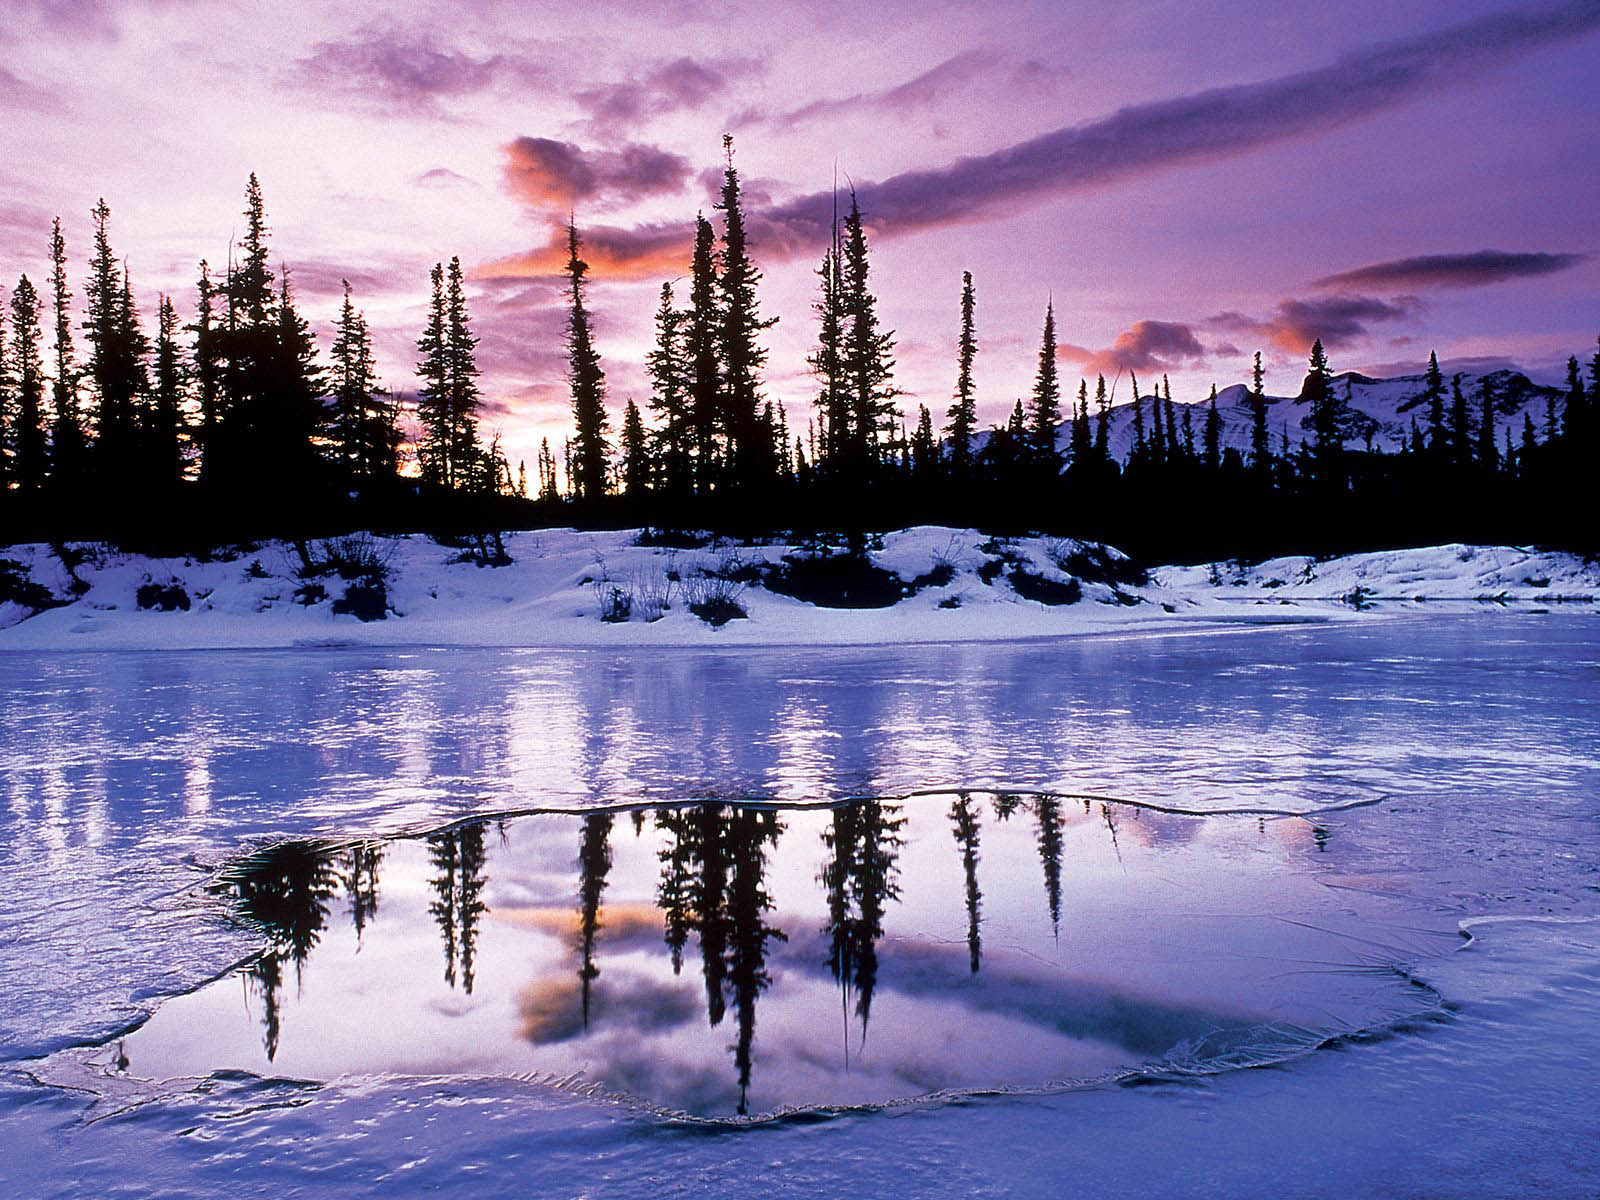 theme wallpaper free,natural landscape,nature,sky,reflection,winter